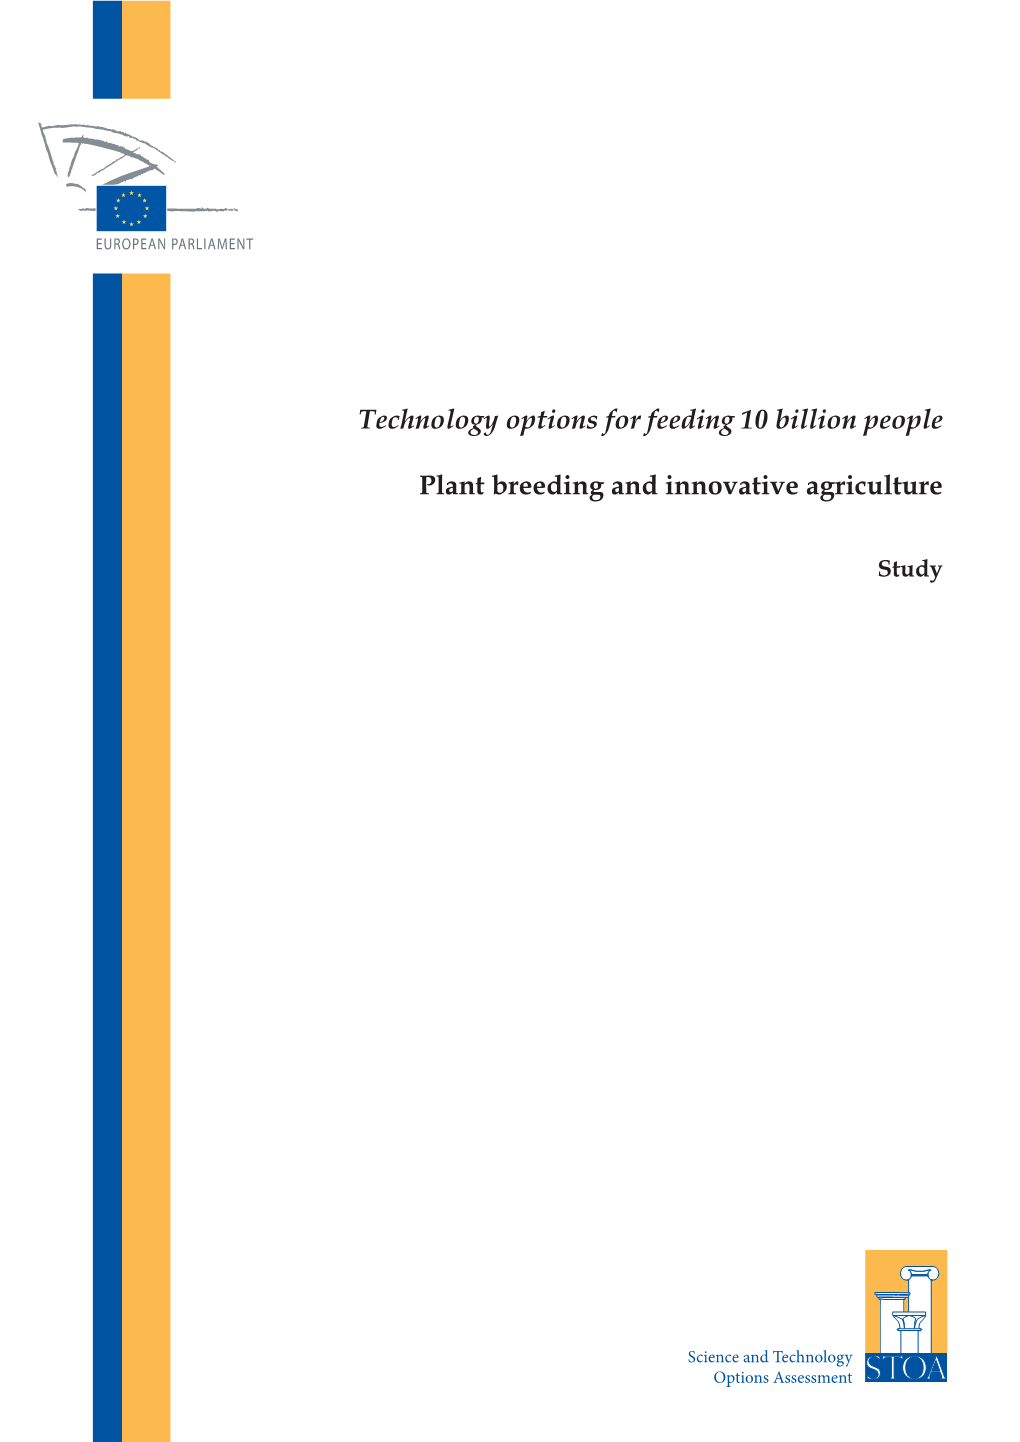 Technology Options for Feeding 10 Billion People Plant Breeding and Innovative Agriculture